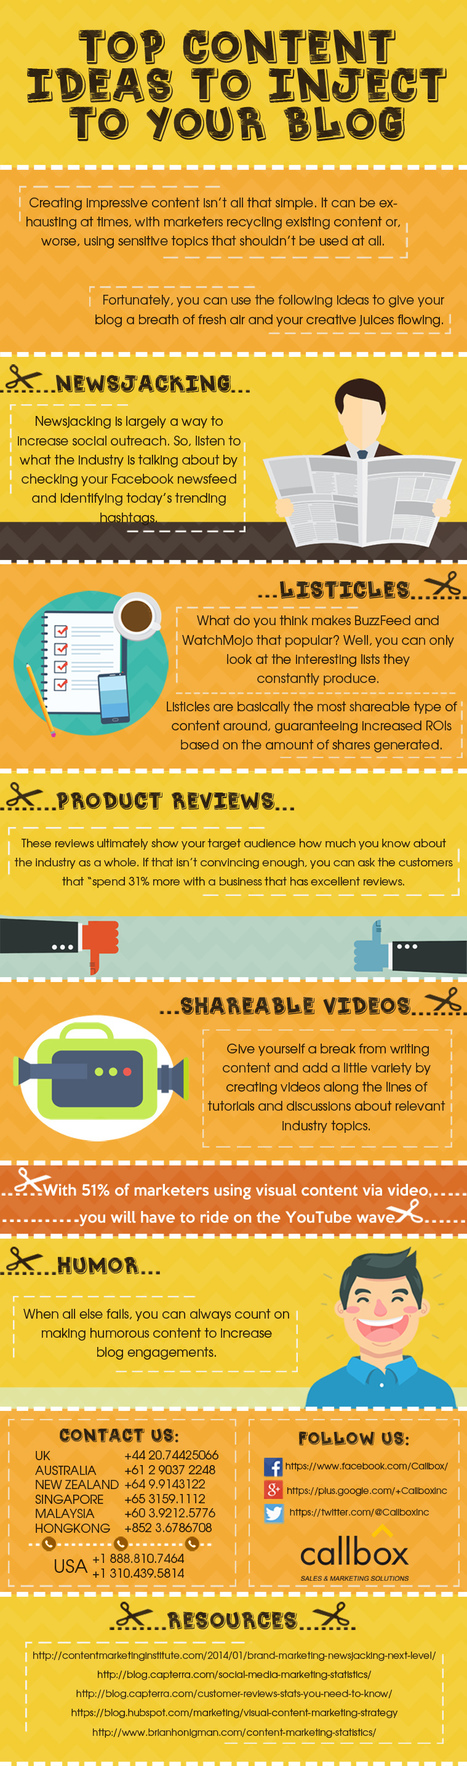 Top 5 Content Ideas to Inject in your Blog [INFOGRAPHIC] | Content Marketing & Content Strategy | Scoop.it